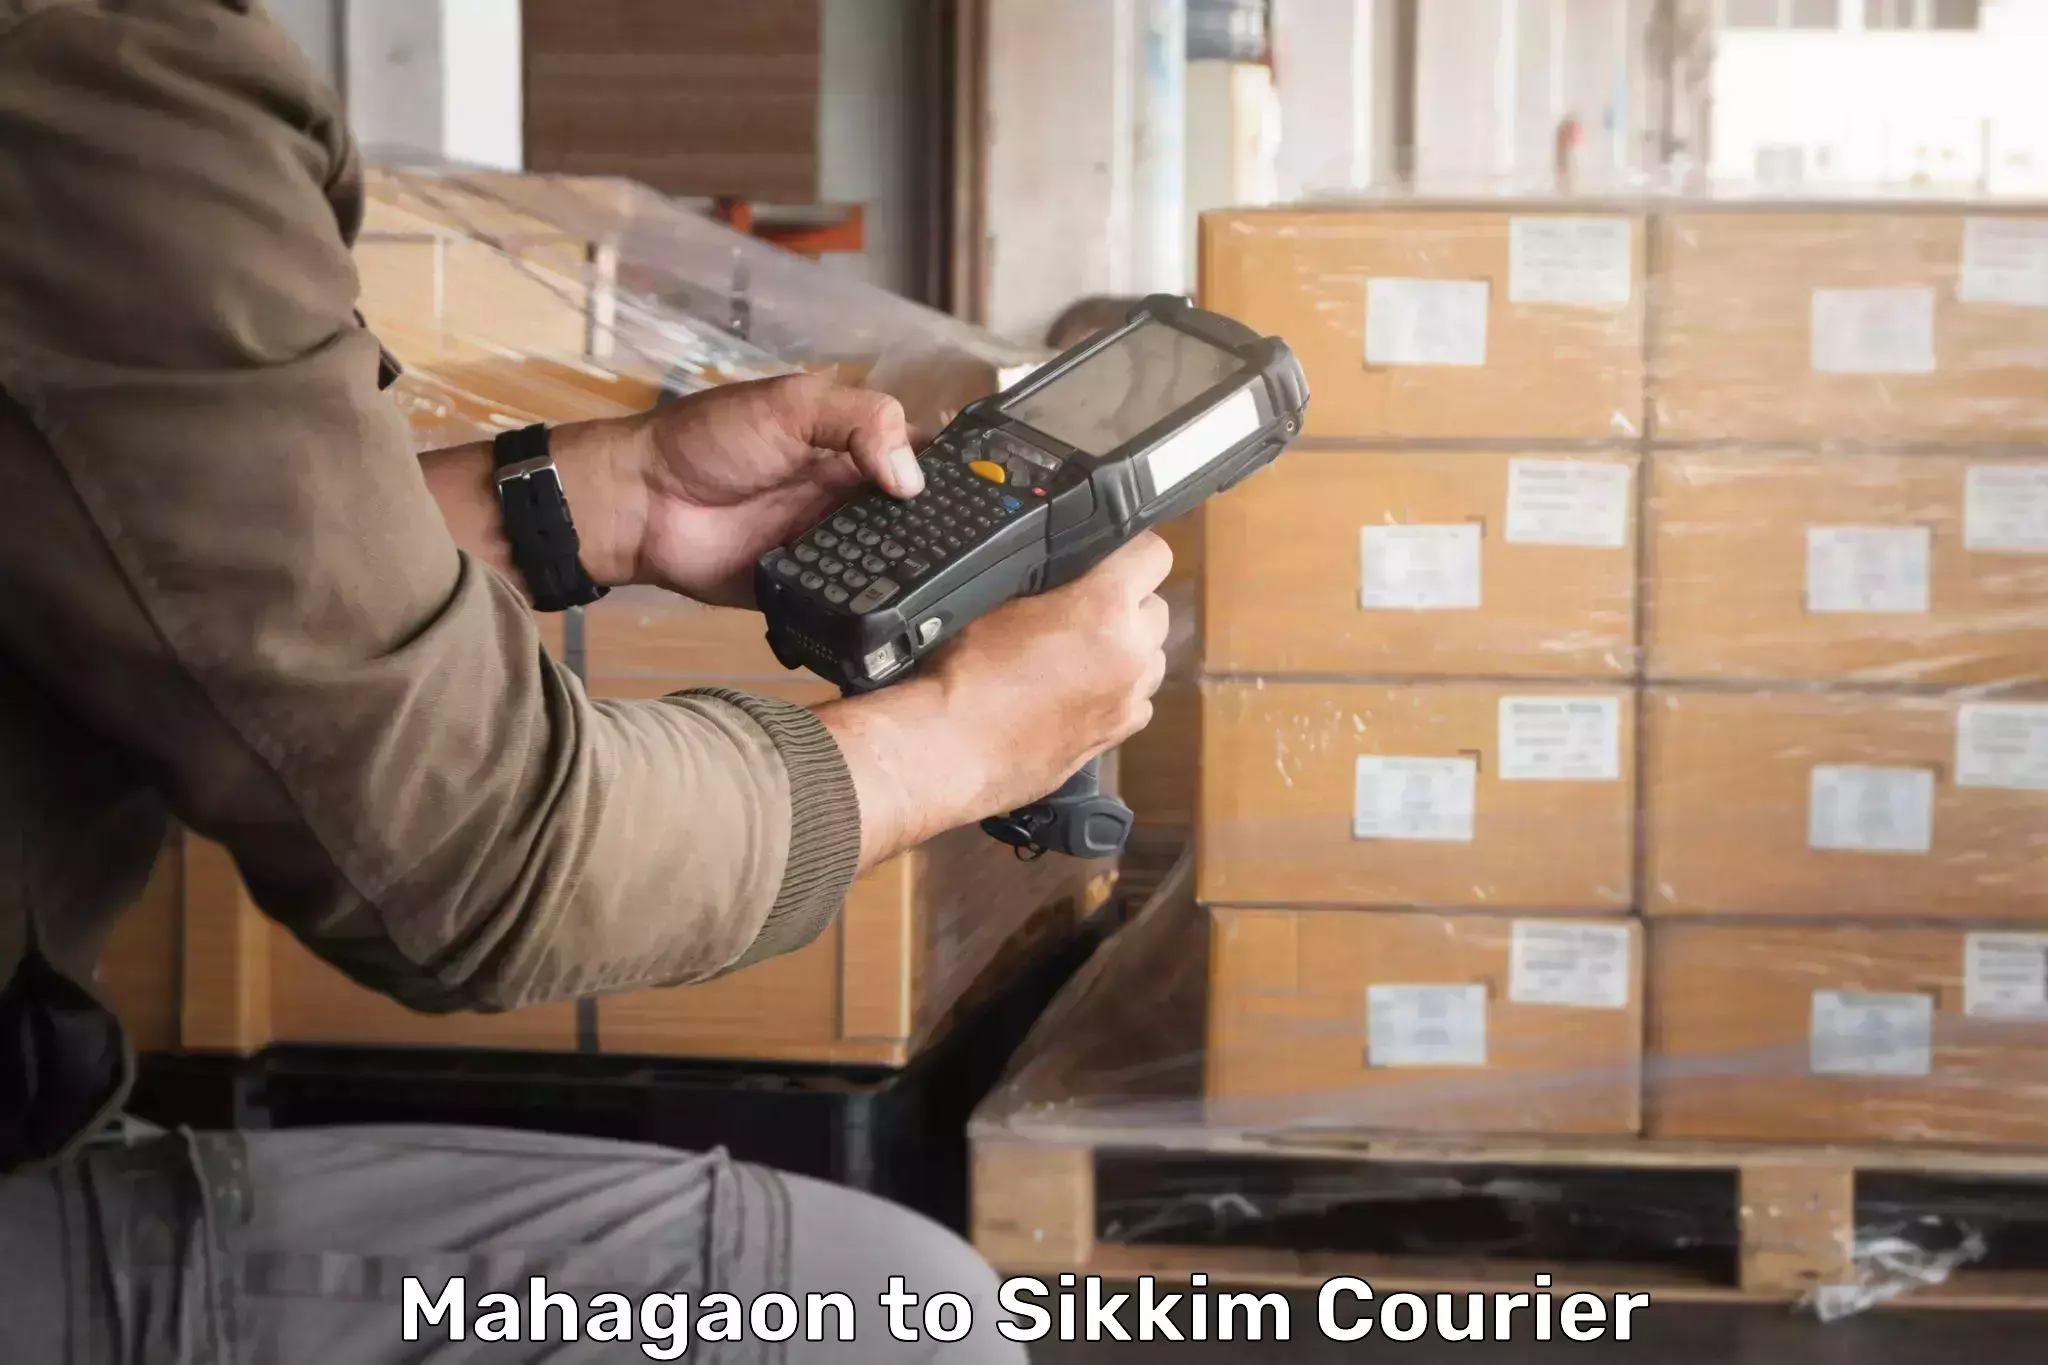 Professional courier handling Mahagaon to South Sikkim